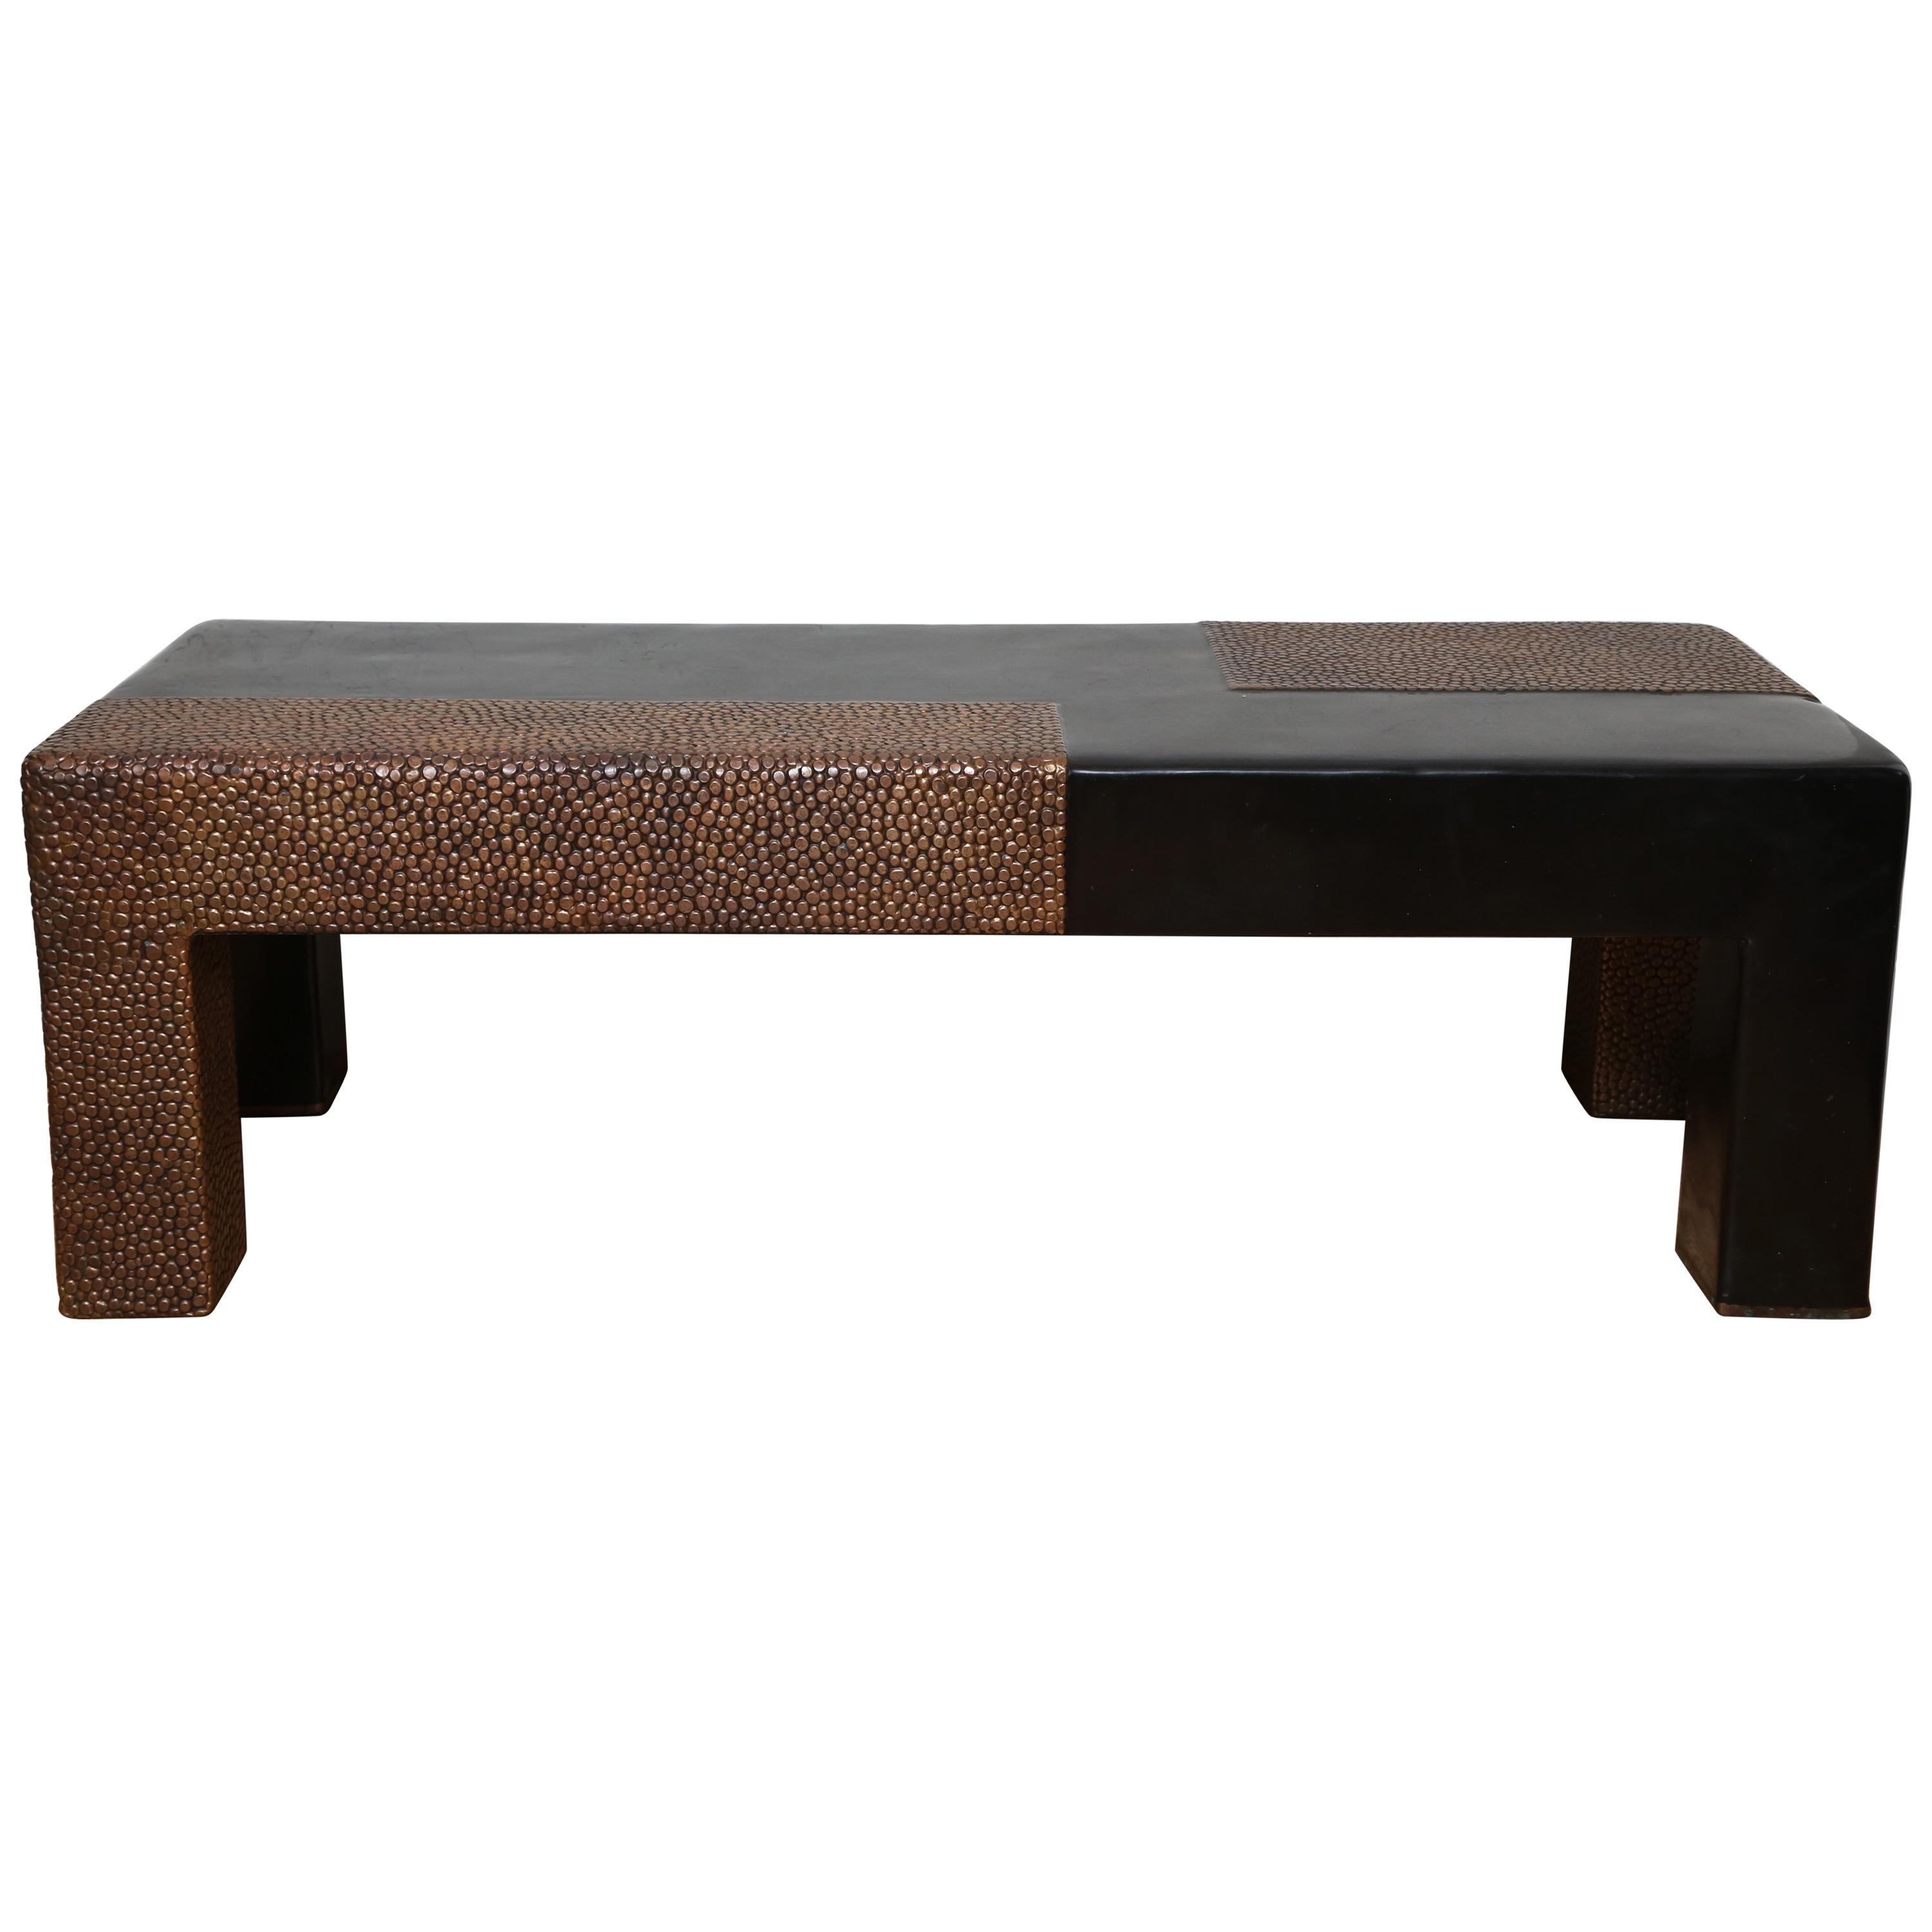 Black Lacquer and Copper Repousse' Table or Bench by Robert Kuo